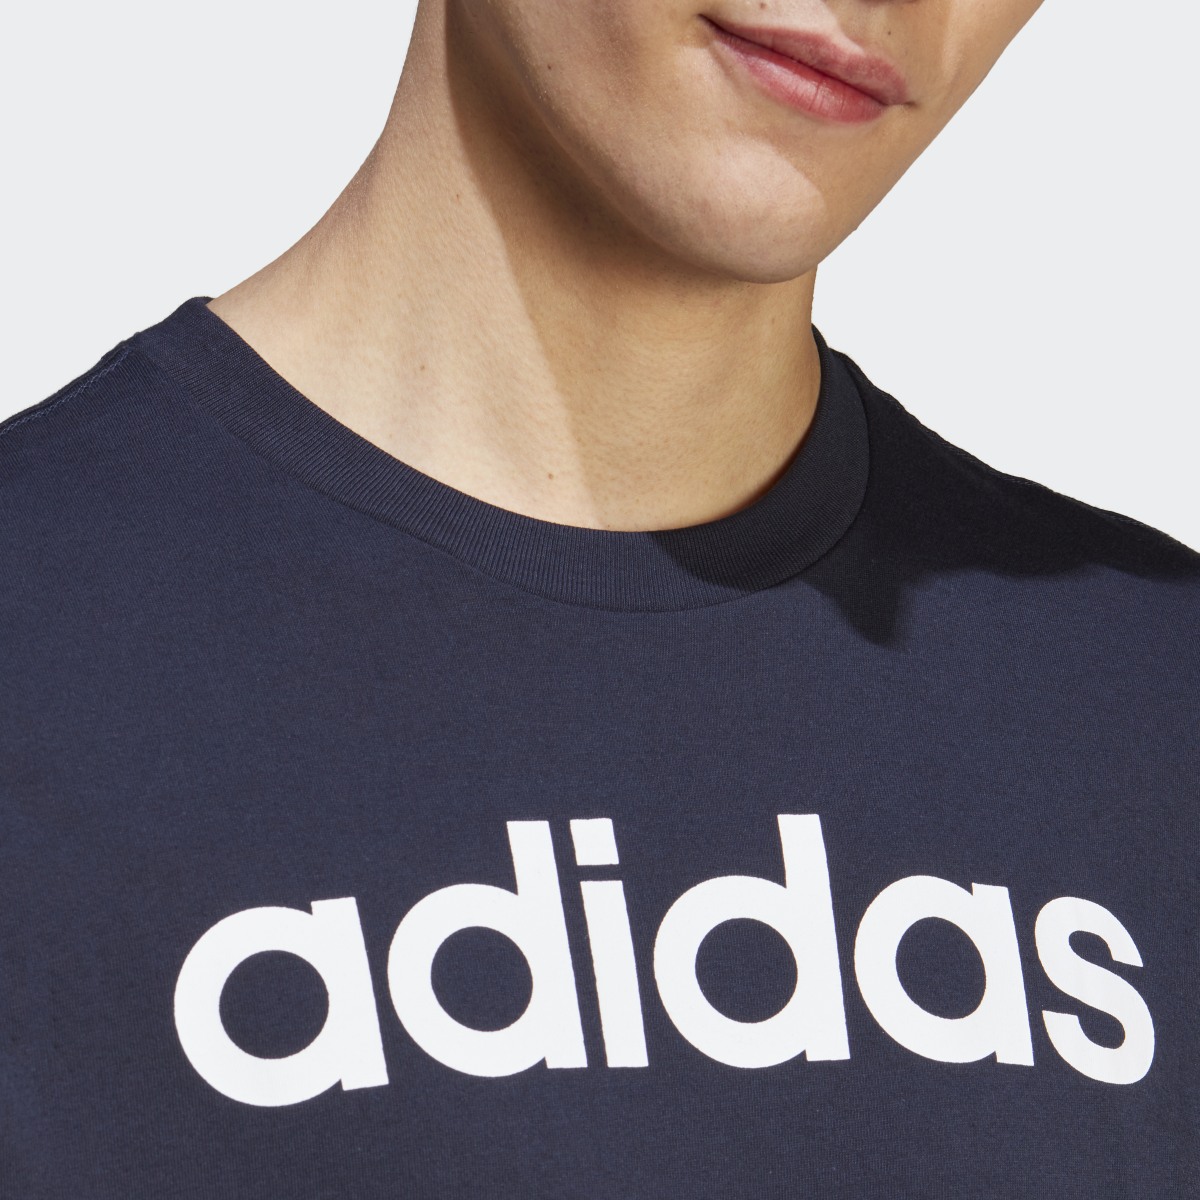 Adidas Essentials Single Jersey Linear Embroidered Logo T-Shirt. 6